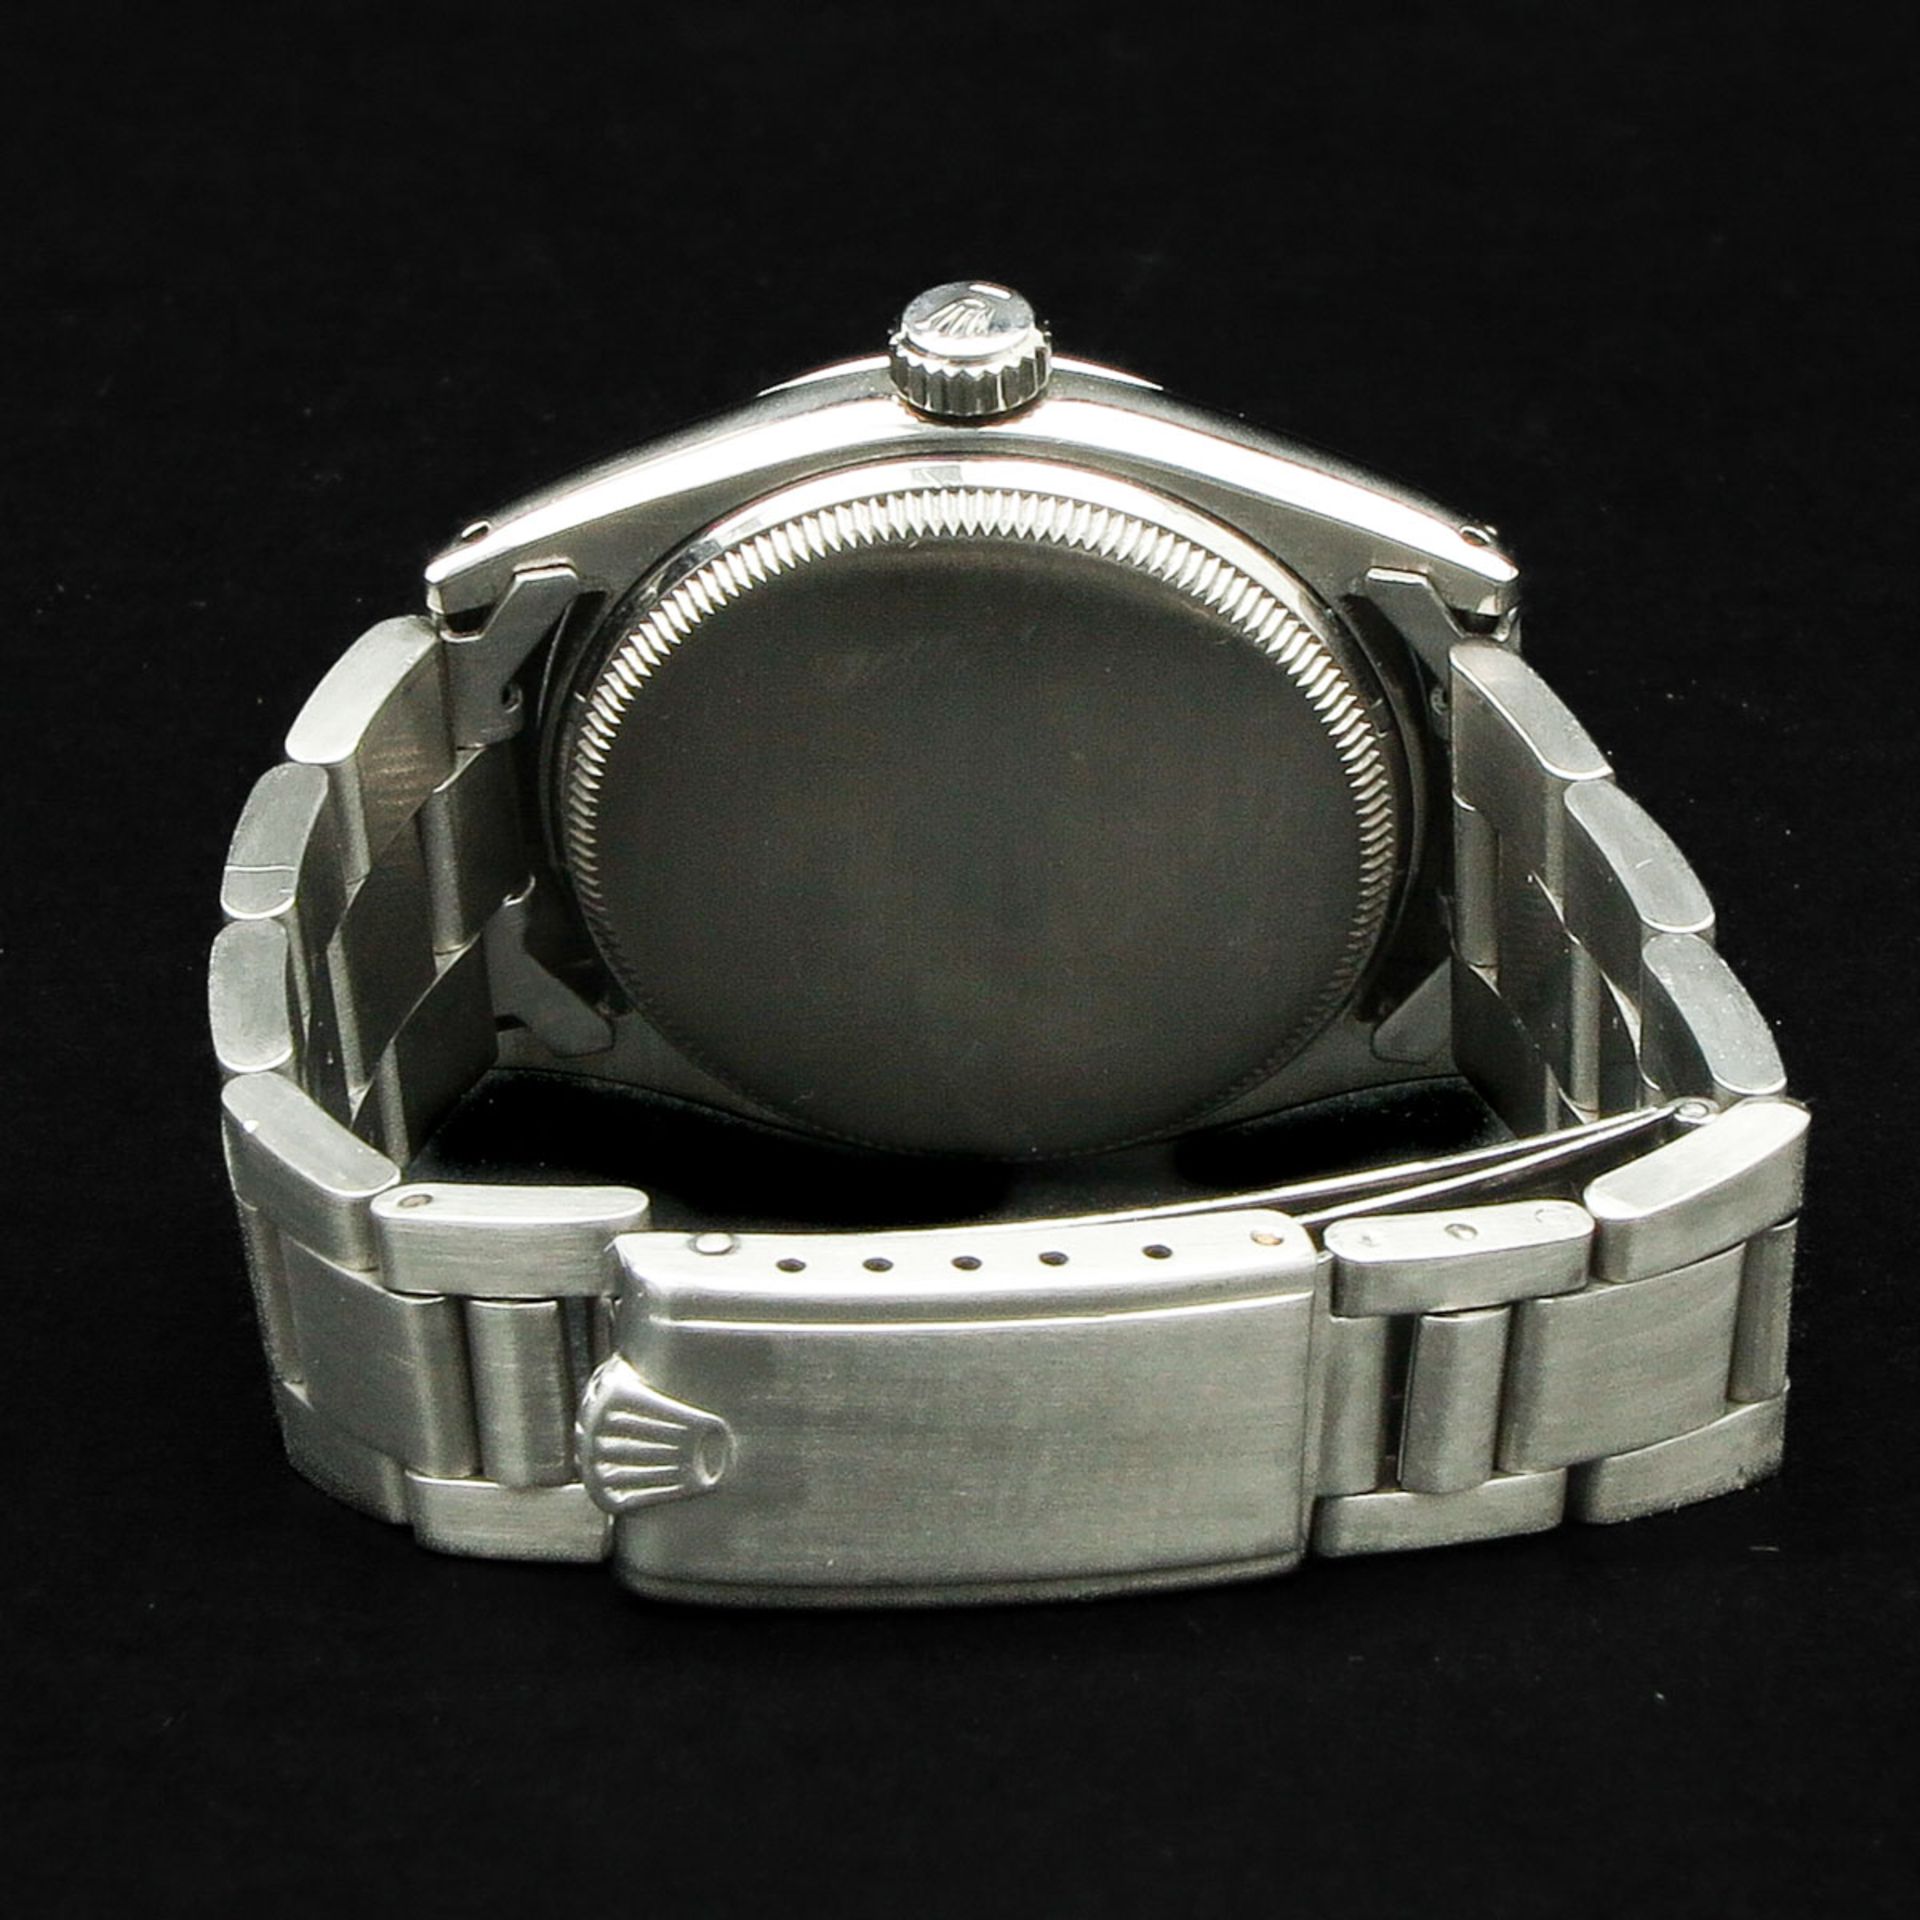 A Mens Rolex Watch - Image 2 of 4